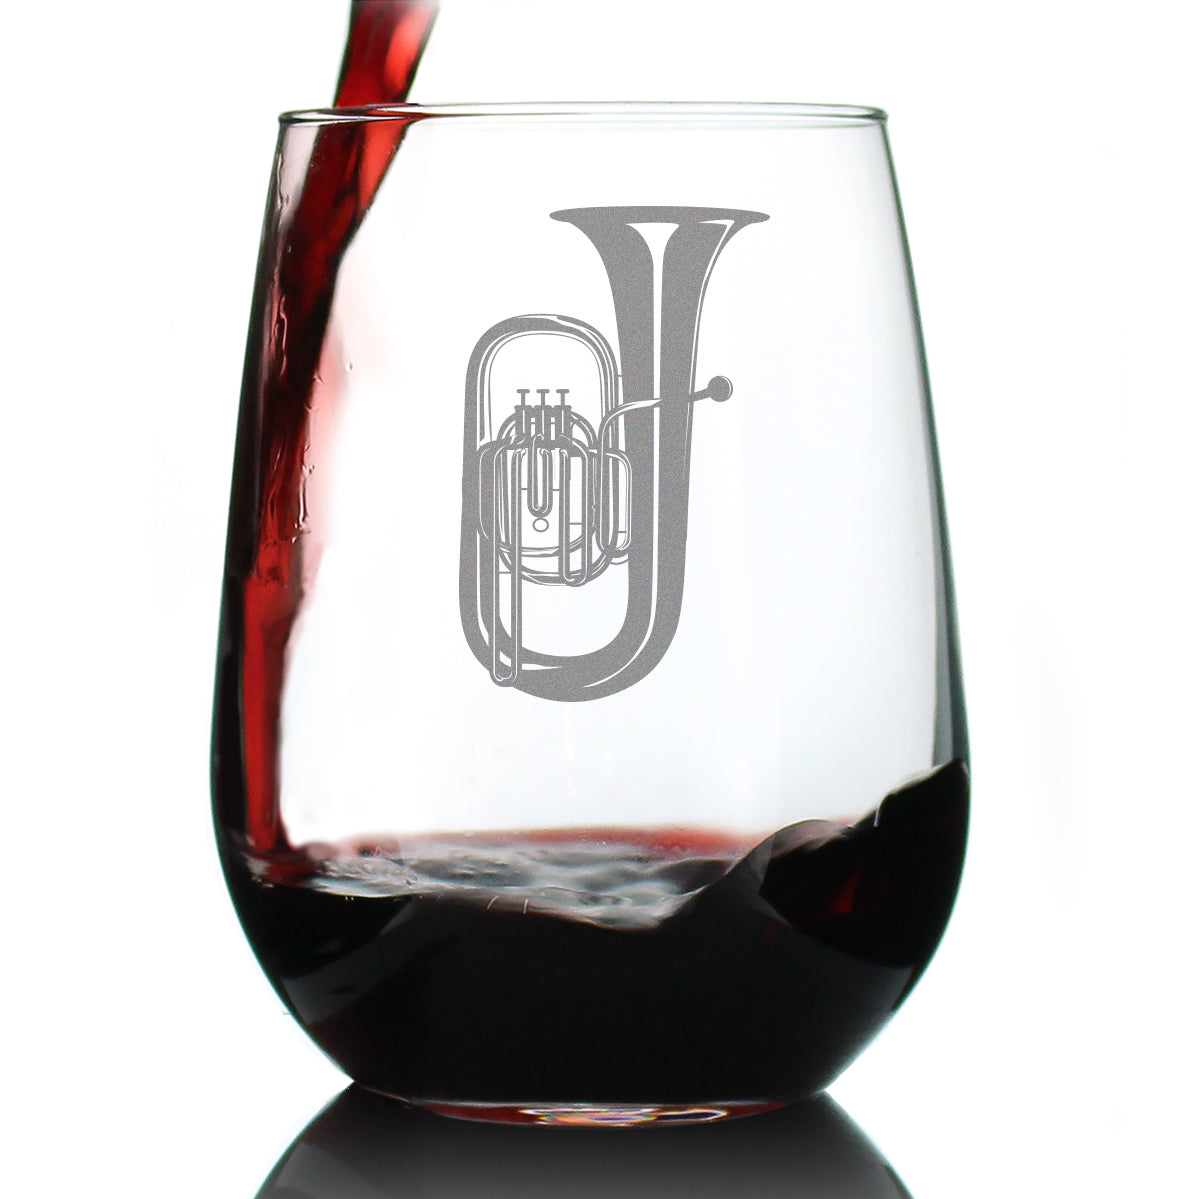 Tuba Stemless Wine Glass - Fun Tuba Gifts for Tuba Players in Band and Orchestra - Large 17 Oz Glasses